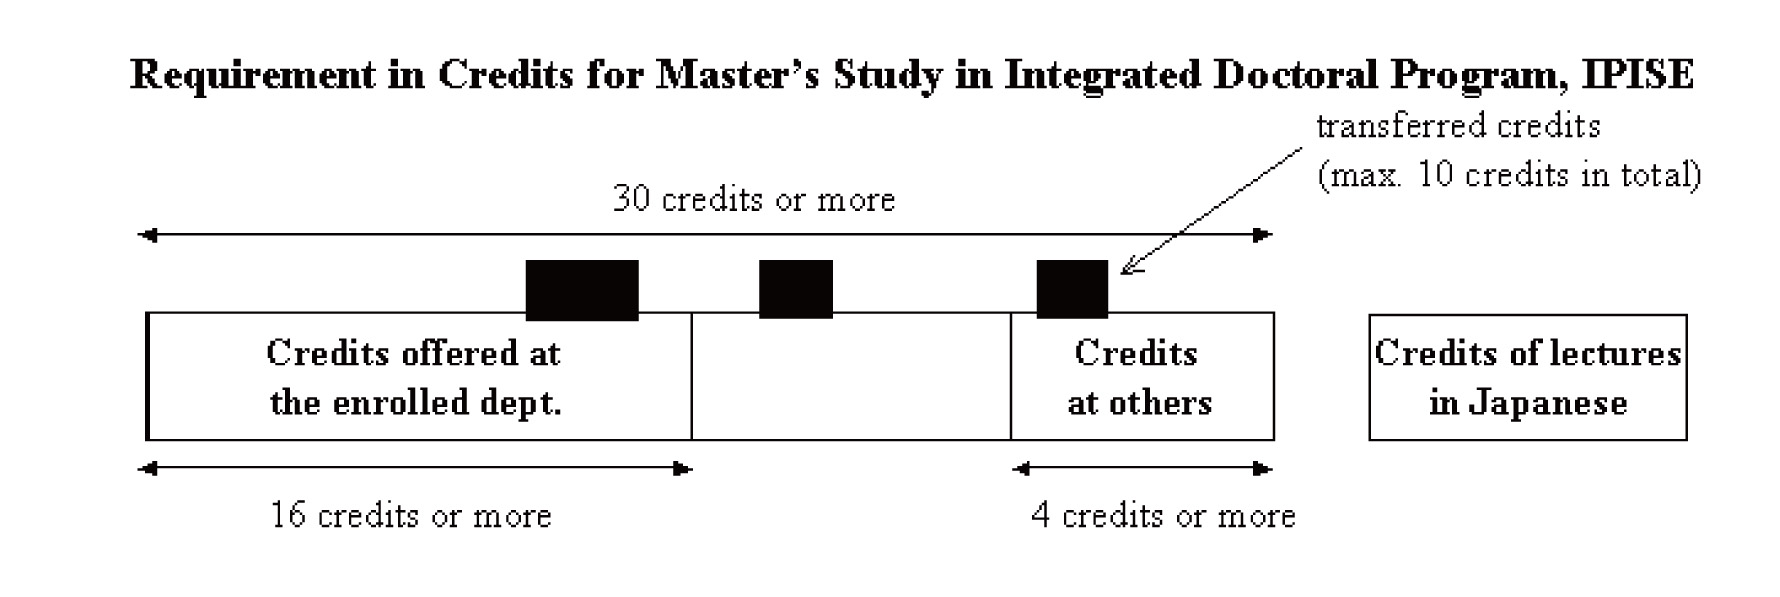 Requirement in Credits for Master's Study in Integrated Doctoral Program, IPISE